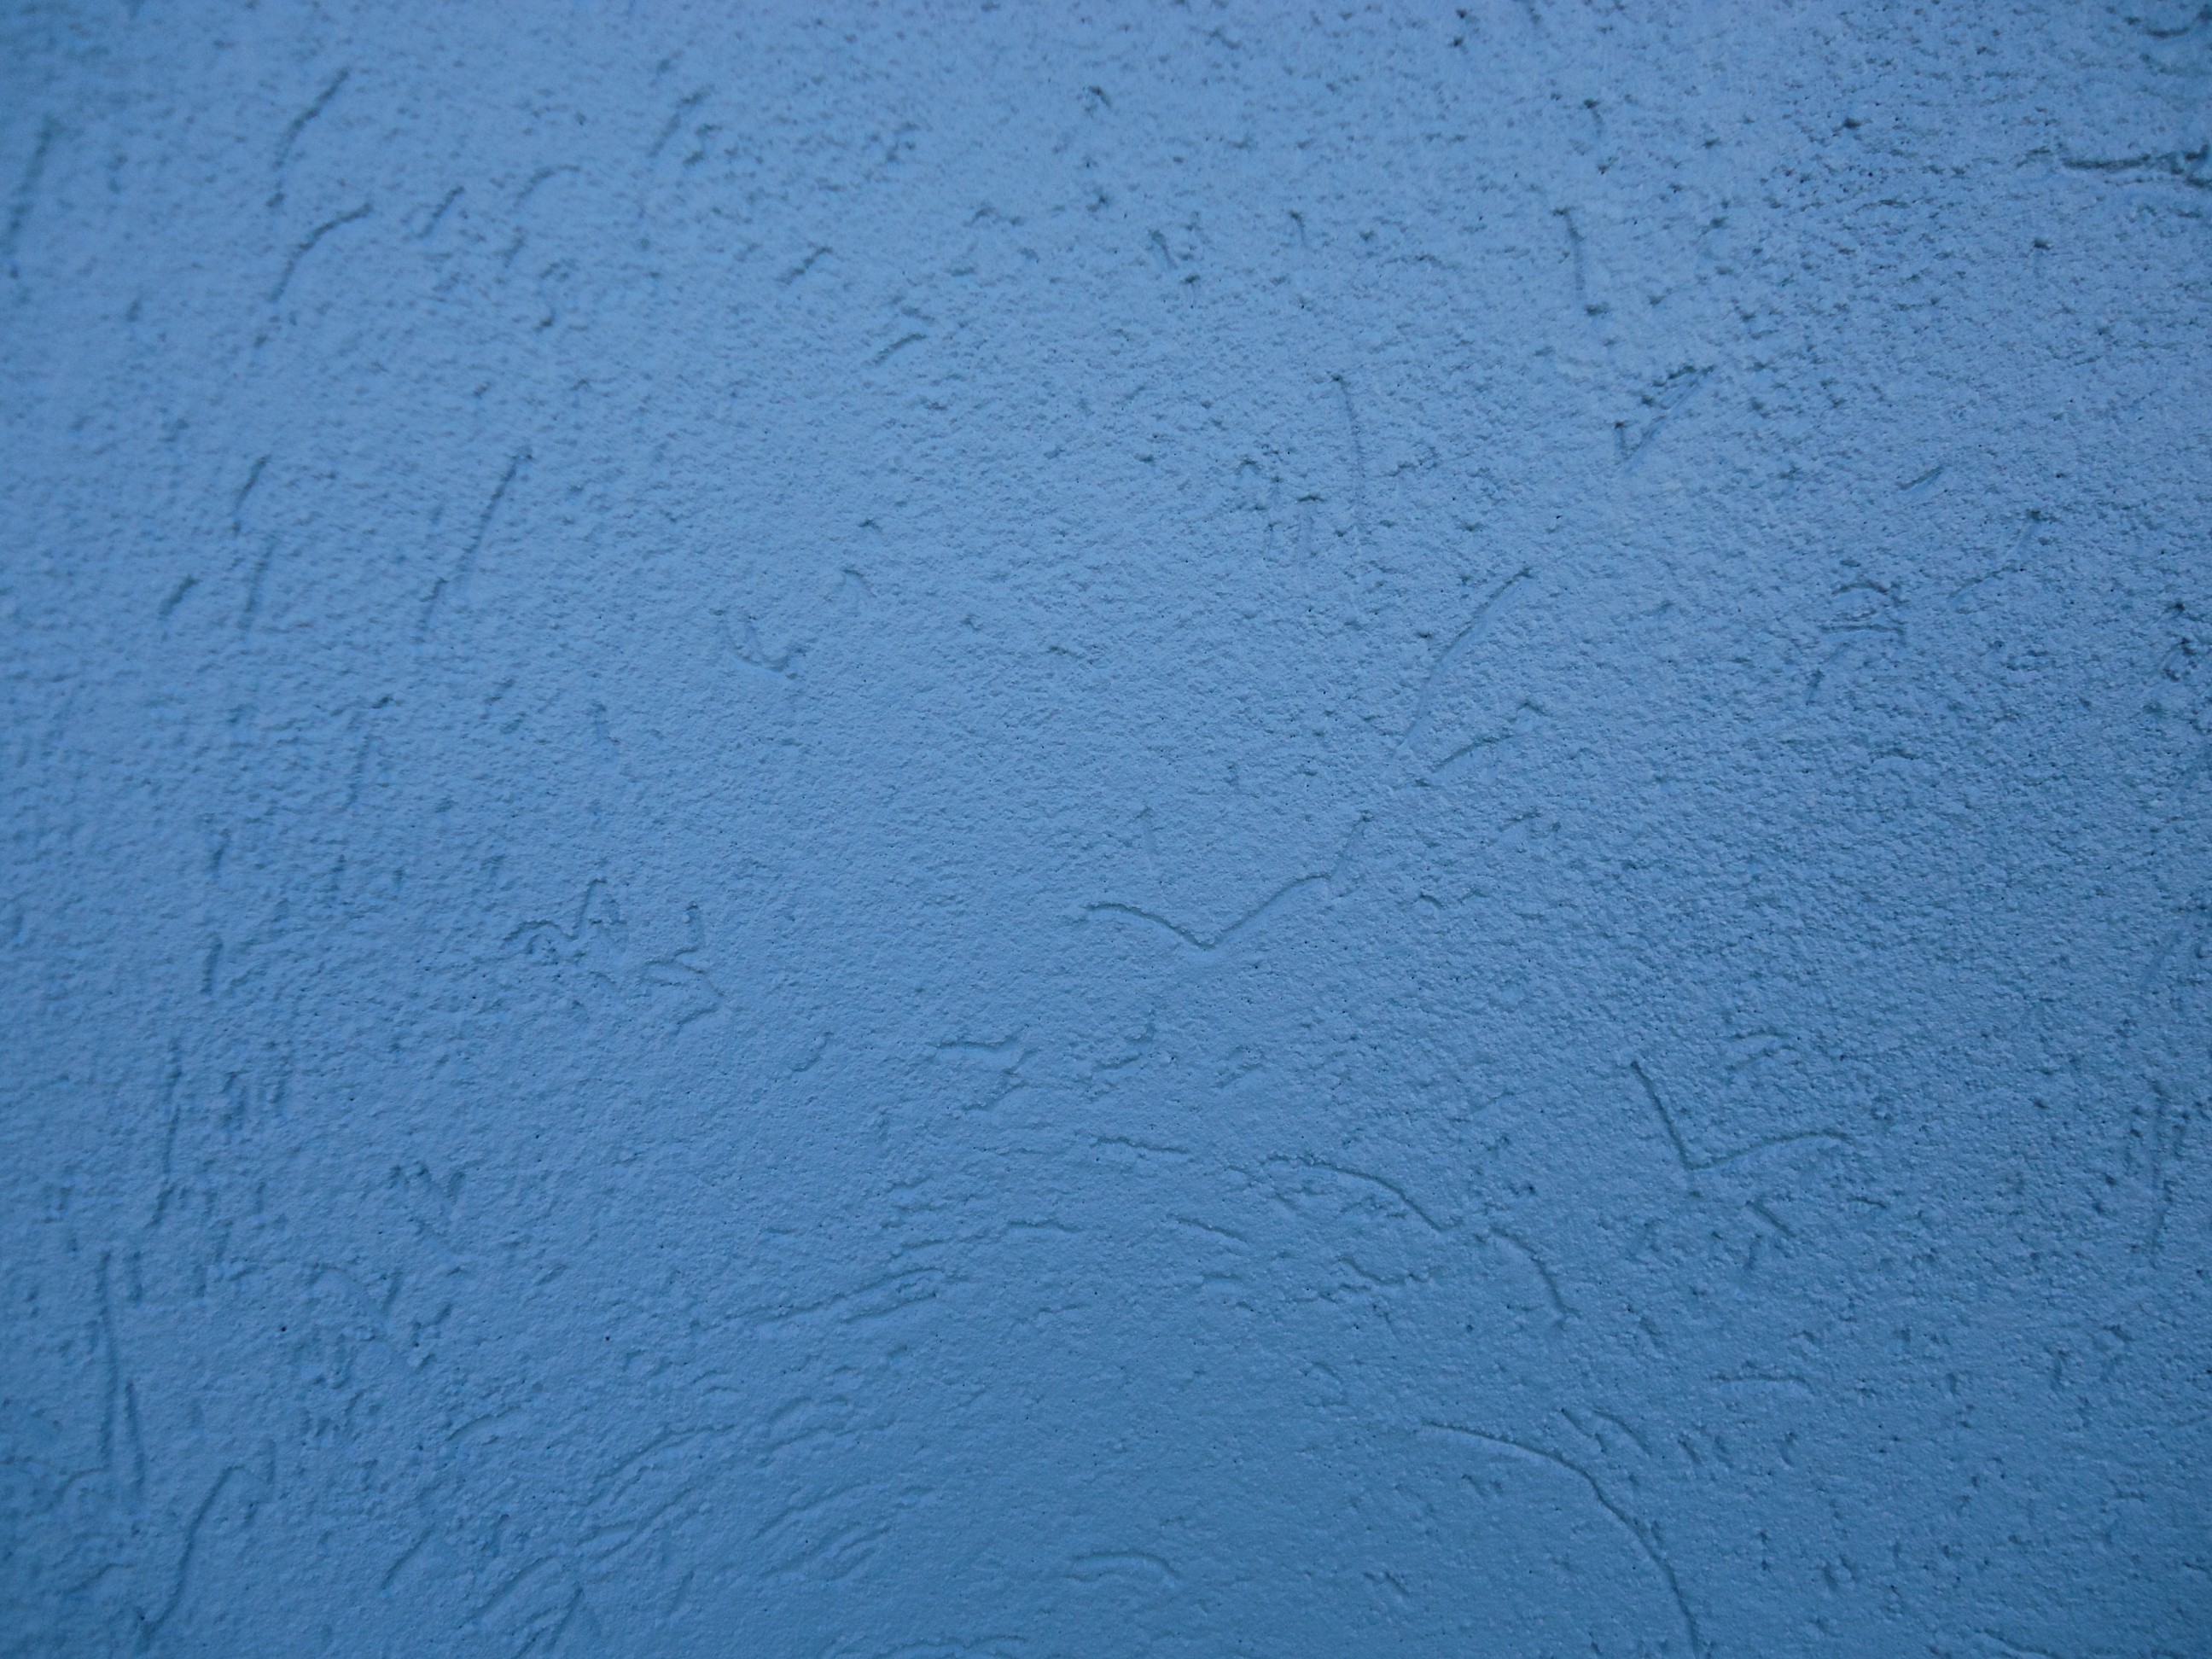 File:Surfaces wall textured painted blue.JPG - Wikimedia Commons